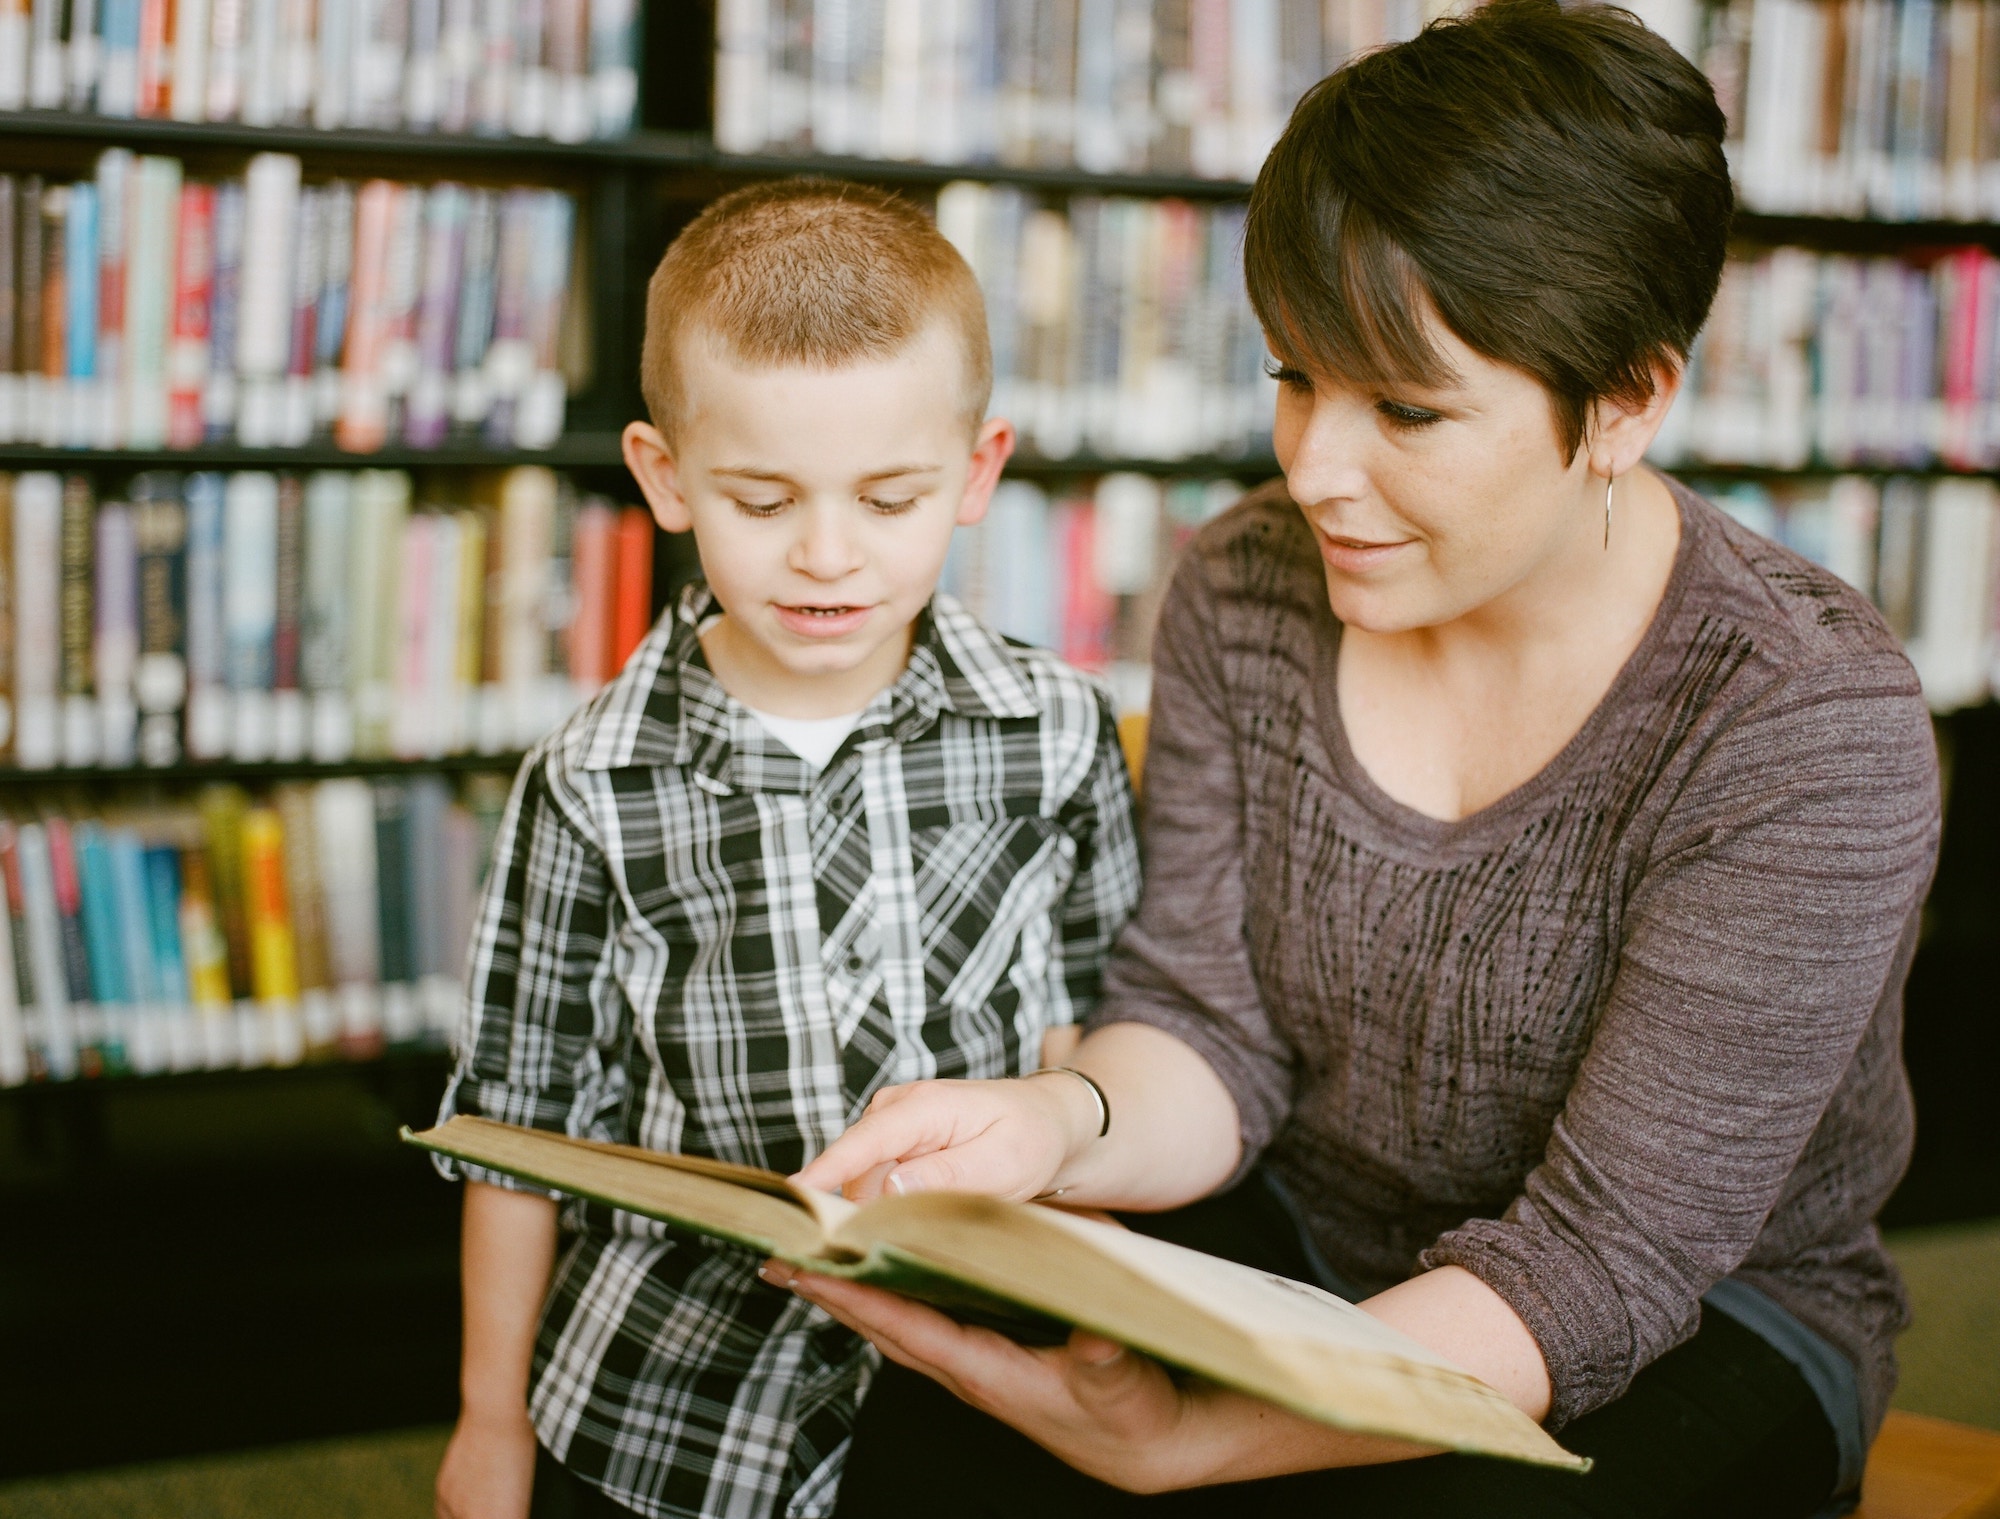 A woman reading a book to a child